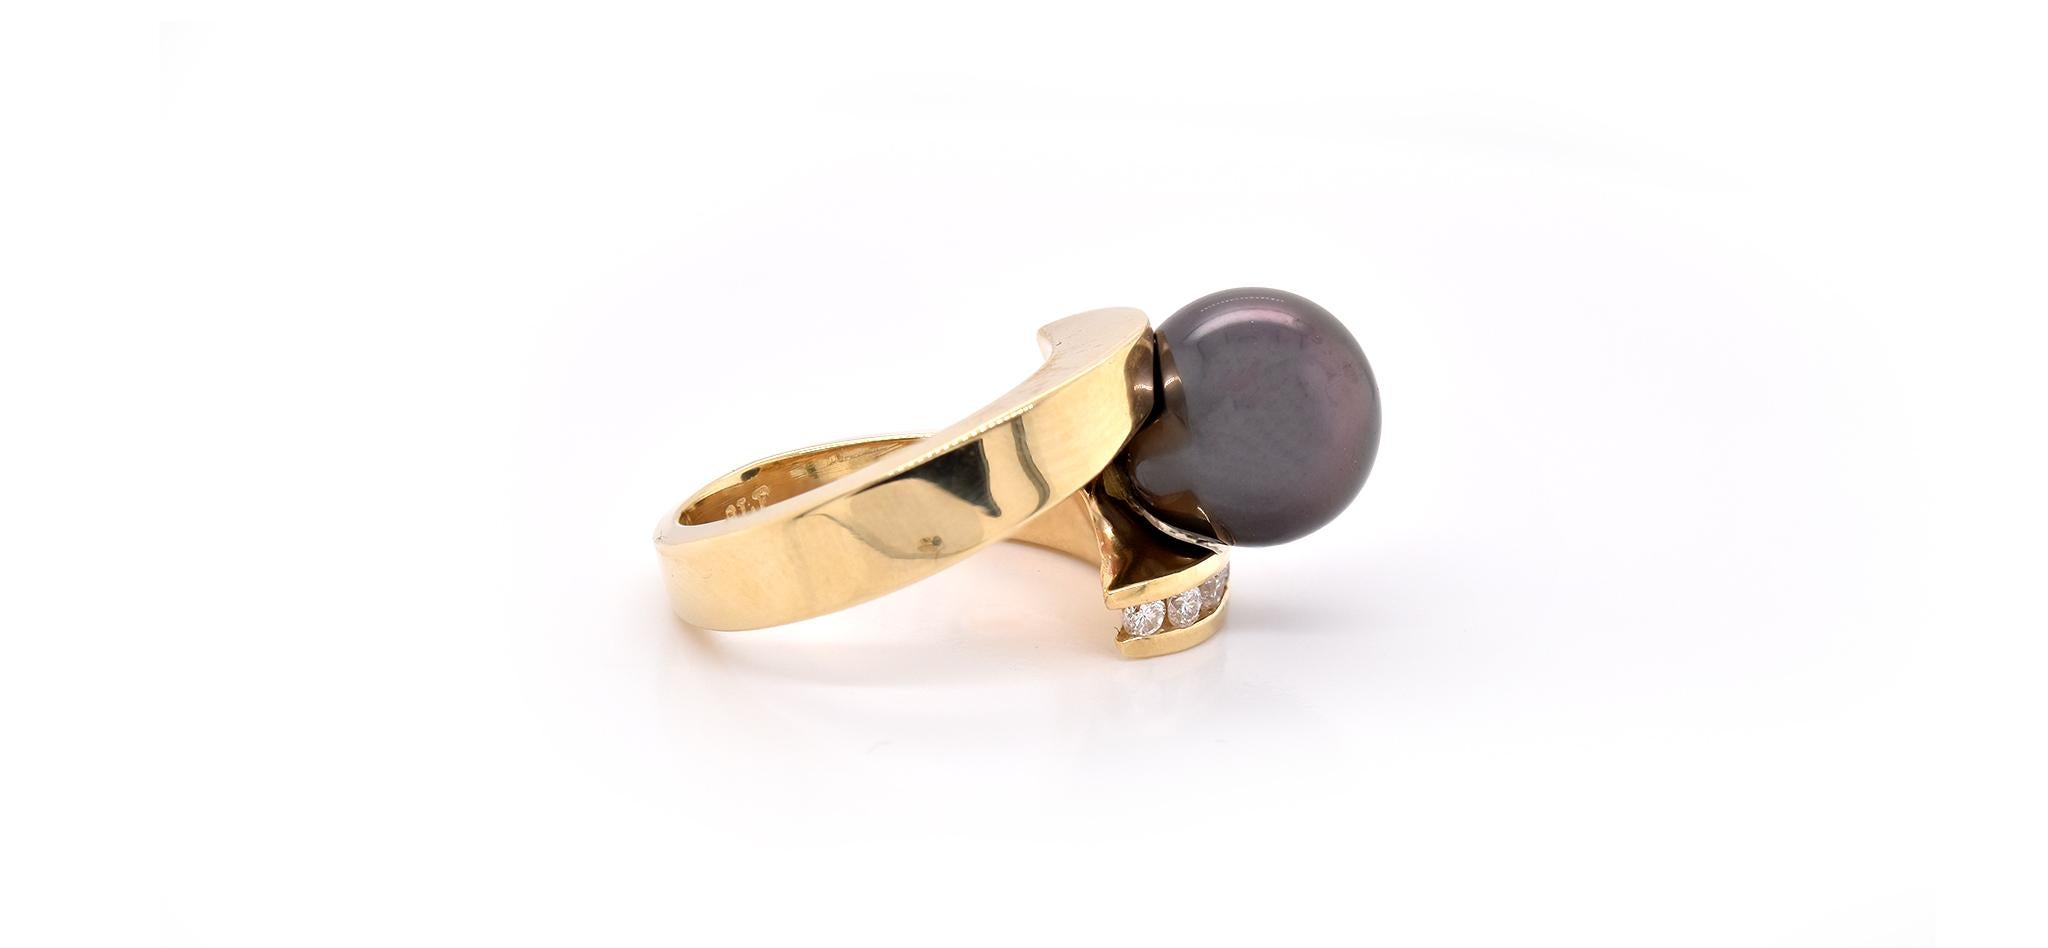 Material: 14k yellow gold
Pearl: 1 Tahitian Pearl = 10.8mm
Diamonds: 12 round brilliant cut = .36cttw 
Color: G
Clarity: VS
Ring Size: 5.75 (please allow two additional shipping days for sizing requests)
Dimensions: ring measures 13.62 X